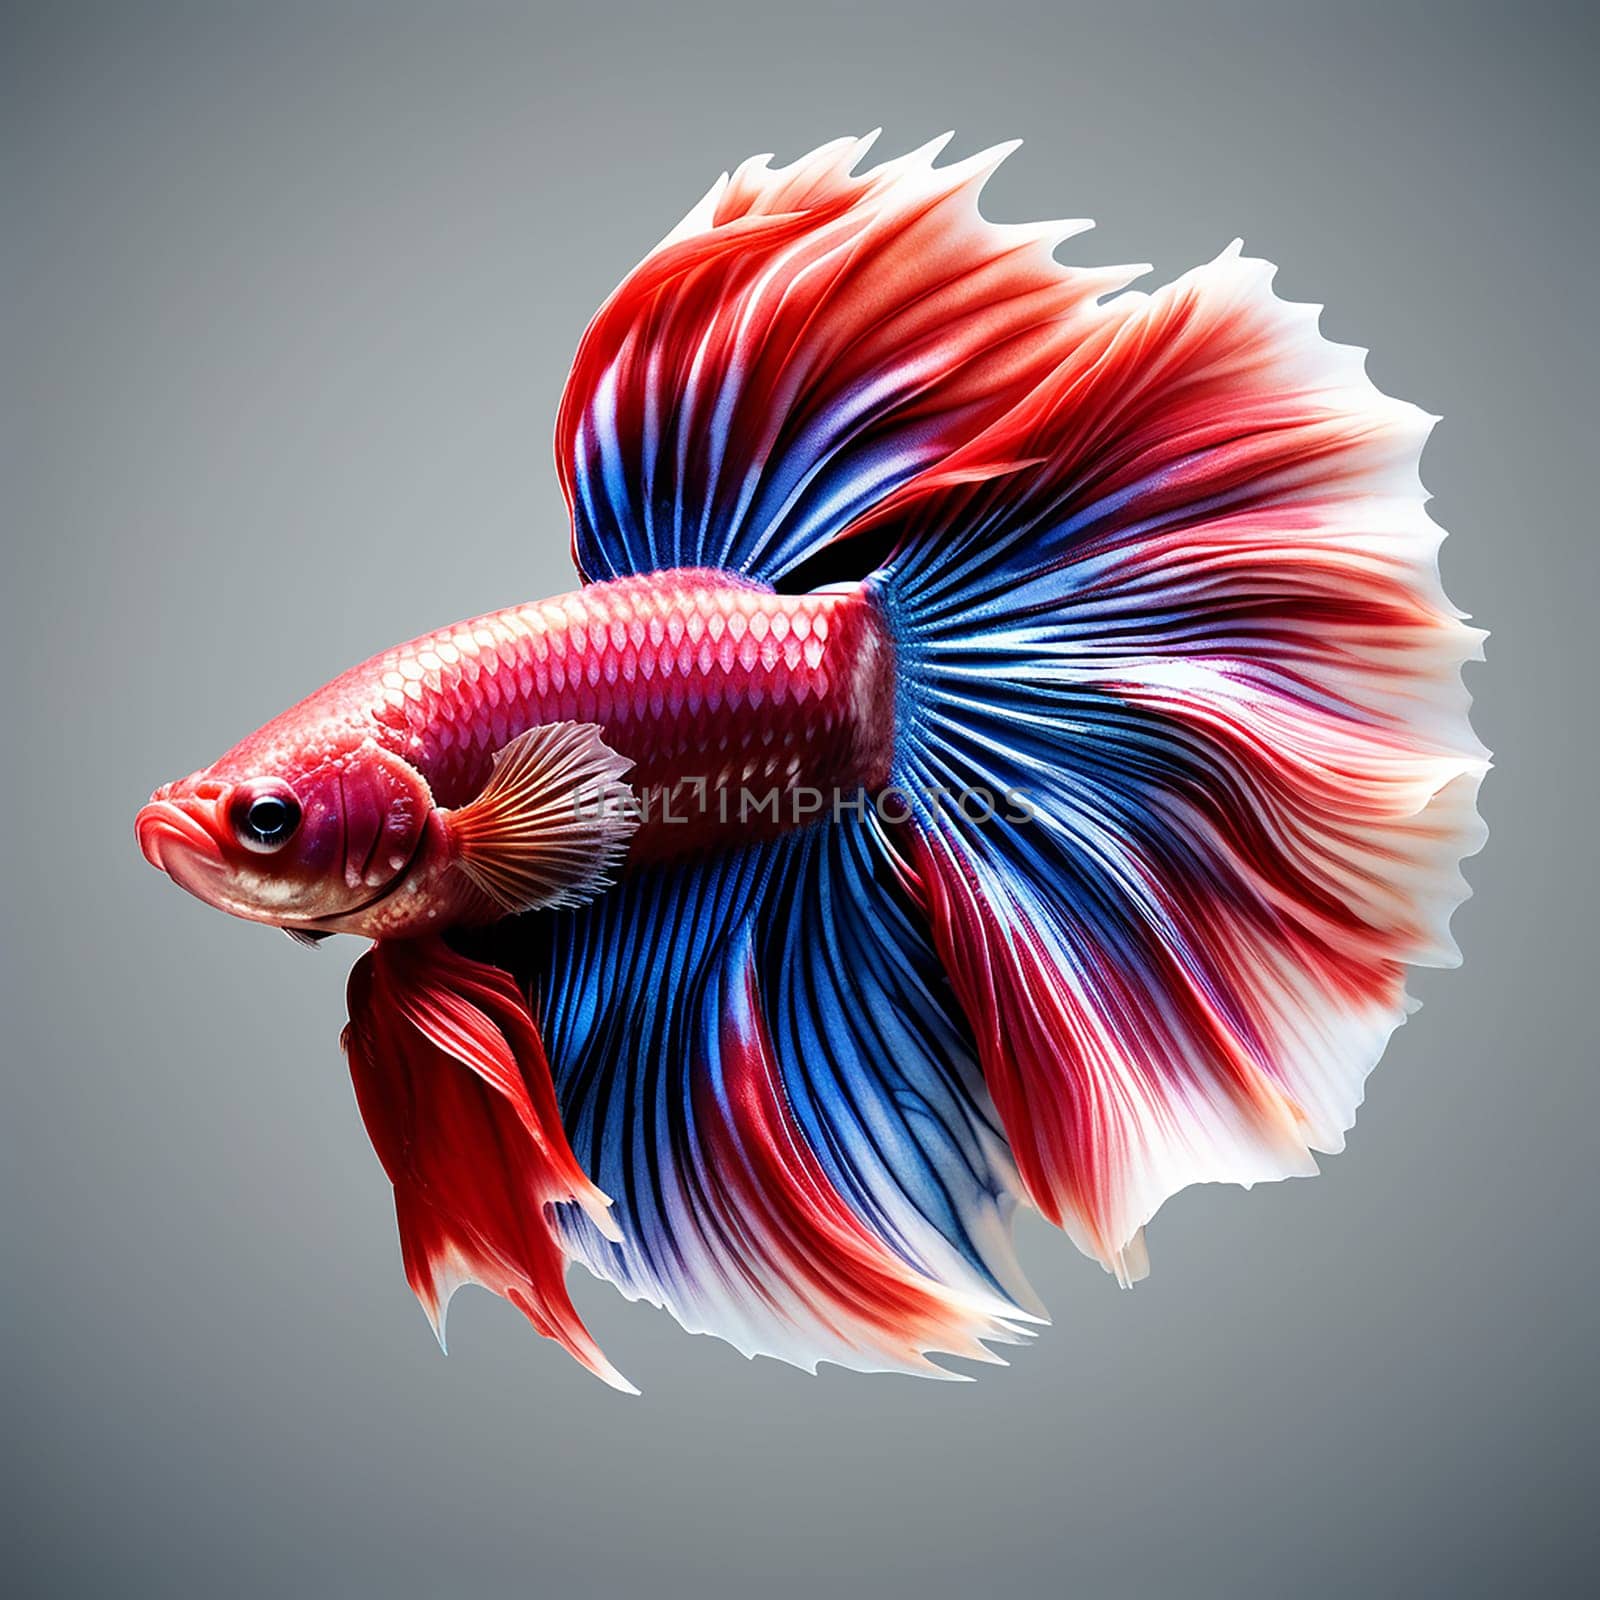 Isolated Betta Fish in a Fine Art Design by Petrichor